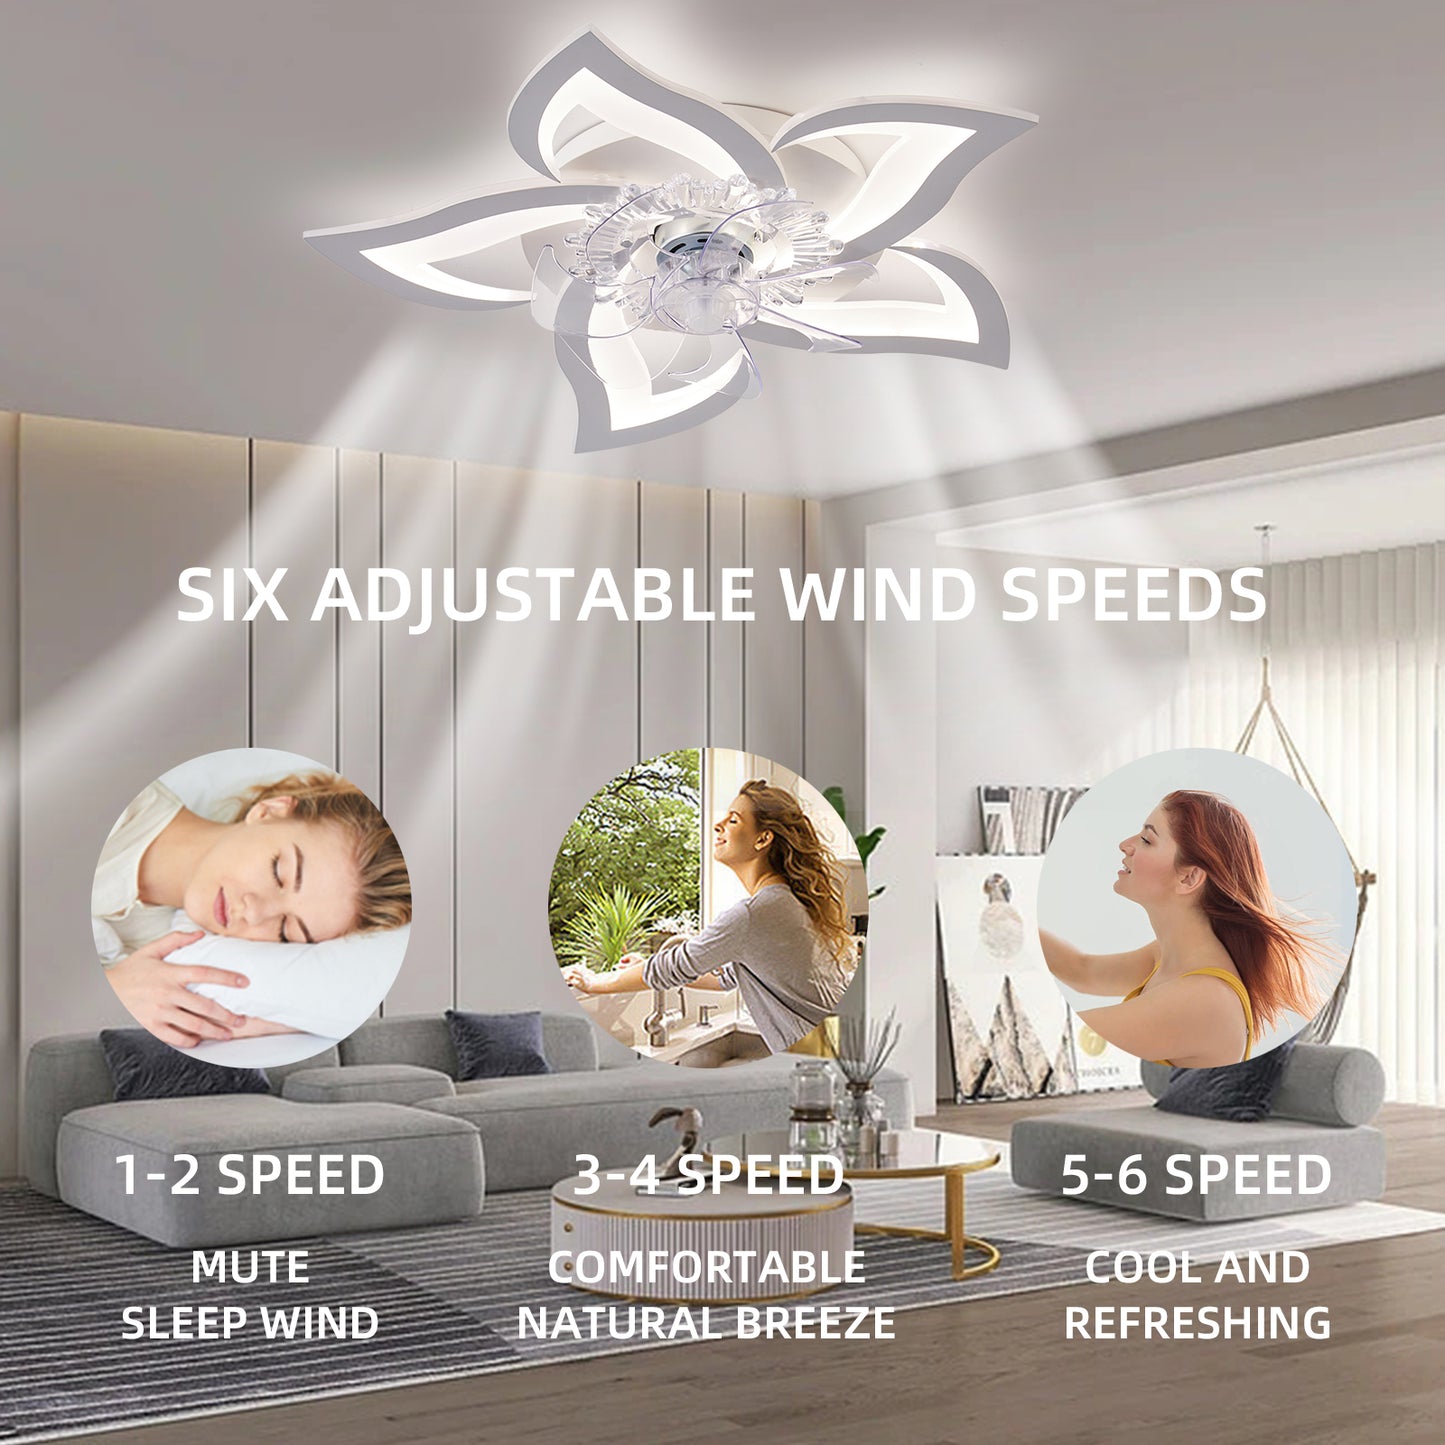 Ceiling Fan with LED Lights, Remote Control, and Adjustable Wind Speeds